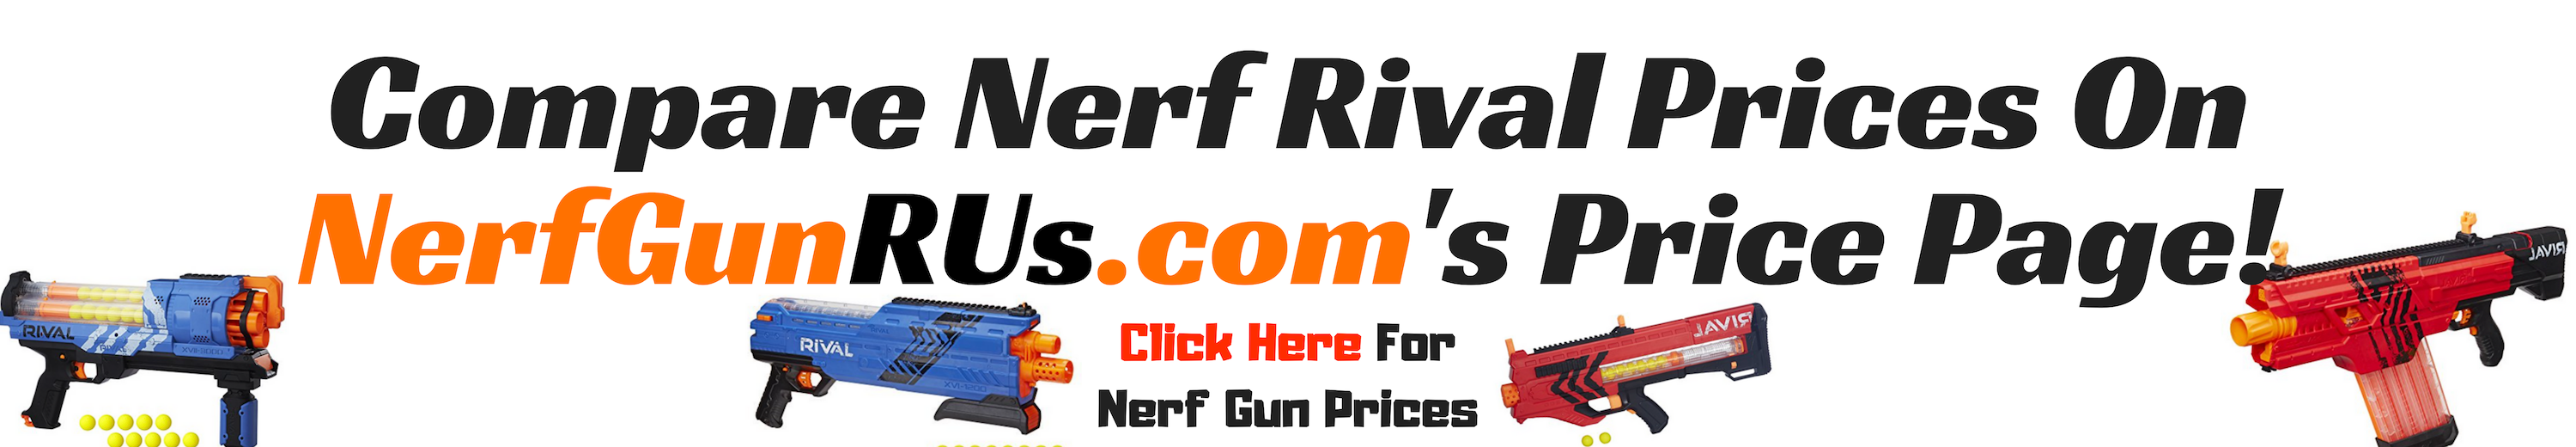 Compare Nerf Rival Prices